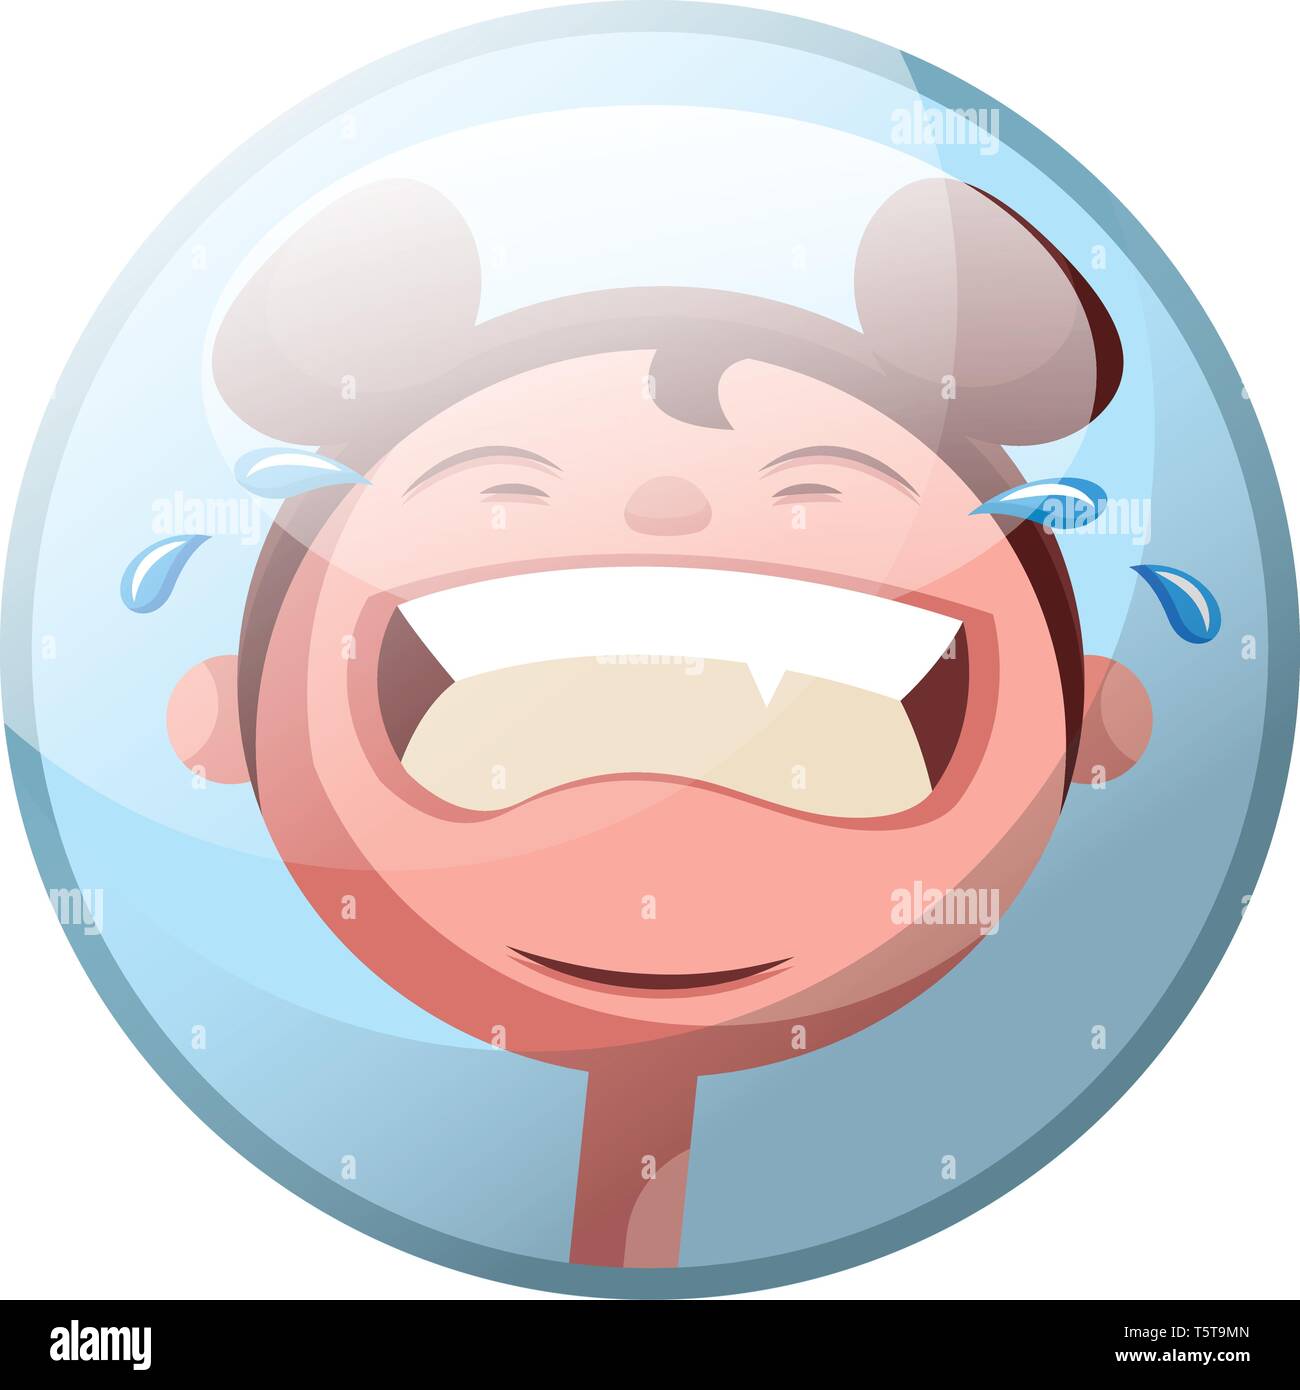 Cartoon character of a girl crying vector illustration in light blue circle on white background. Stock Vector